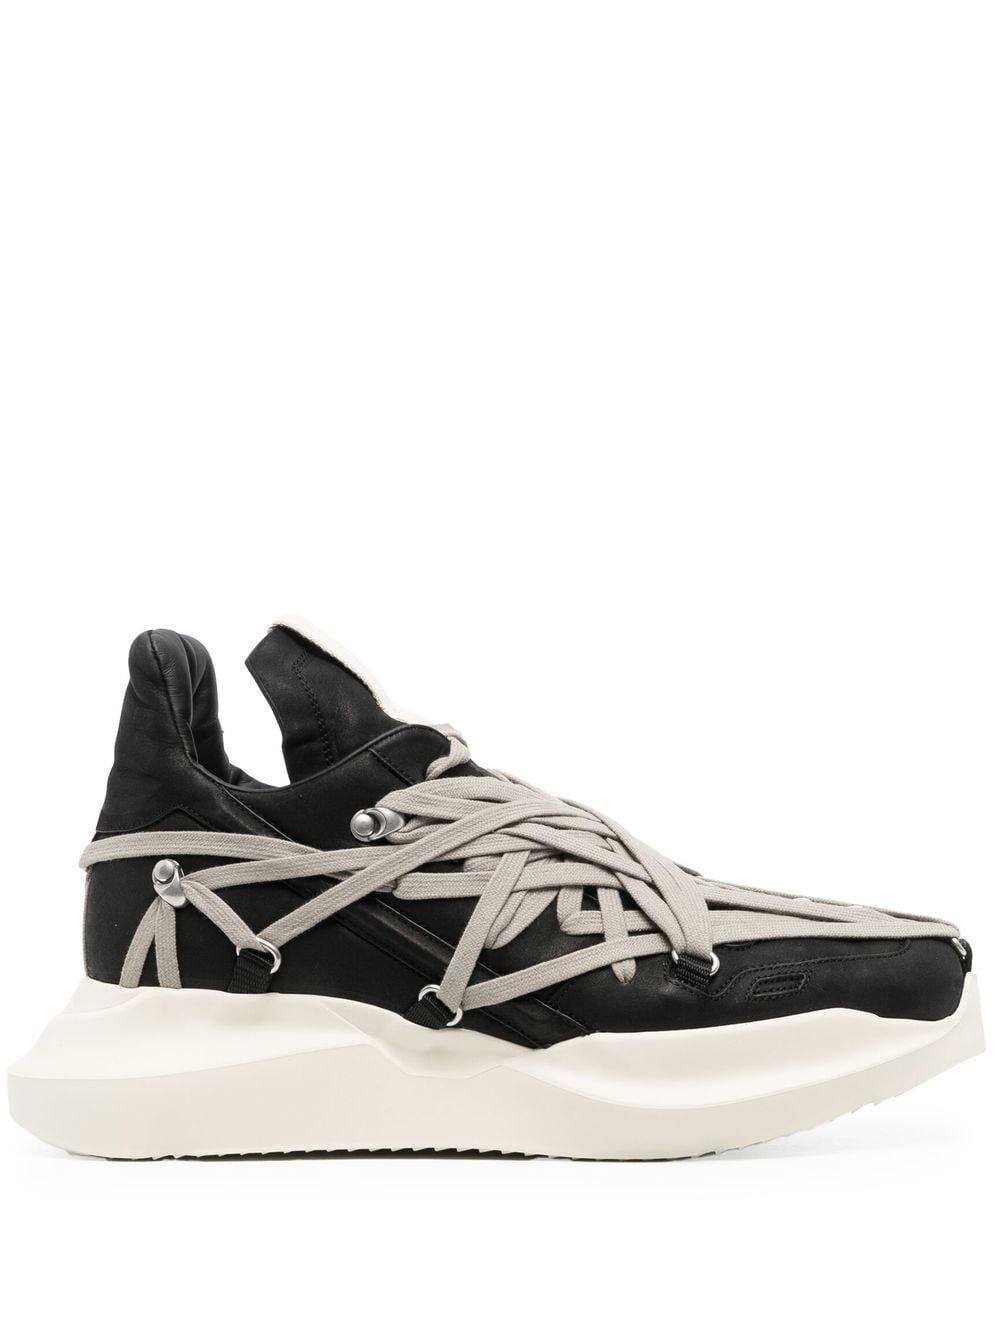 Rick Owens Megalace Runner Sneakers in Black for Men | Lyst